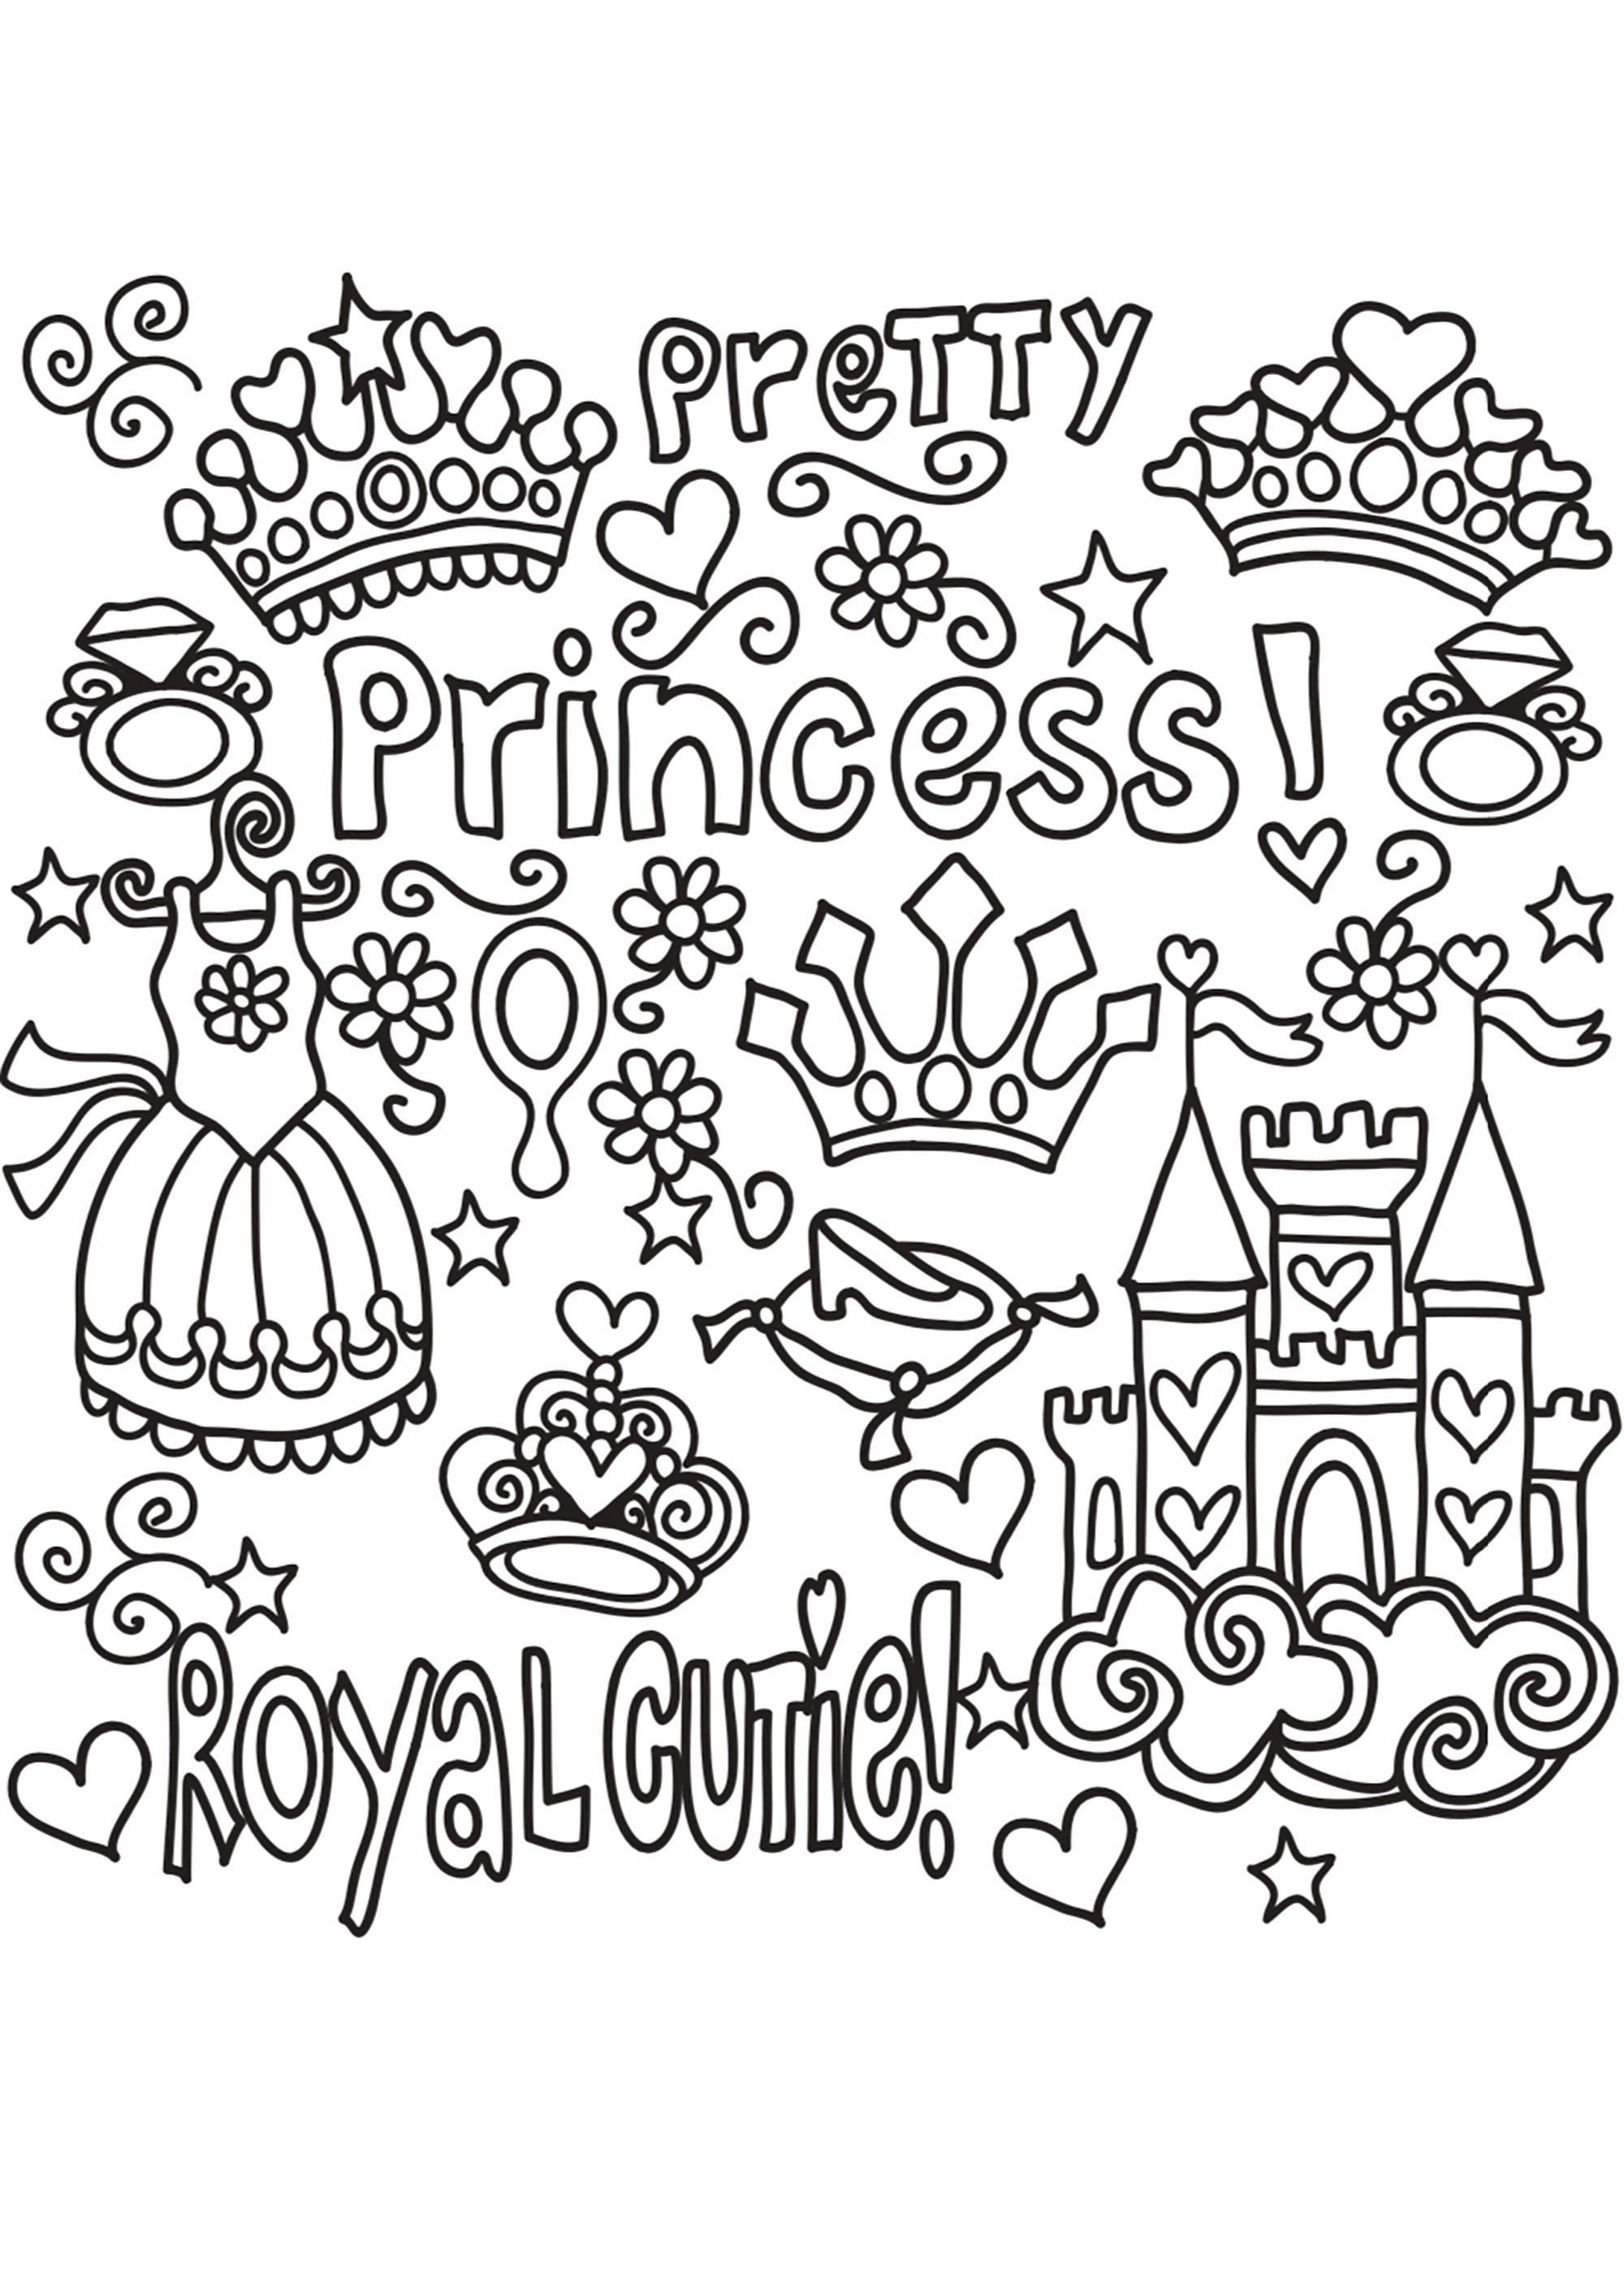 A pretty princess-themed doodle. A princess dress, a tiara, a crown, a castle ... and pretty words ... everything to take you away to an enchanted kingdom.